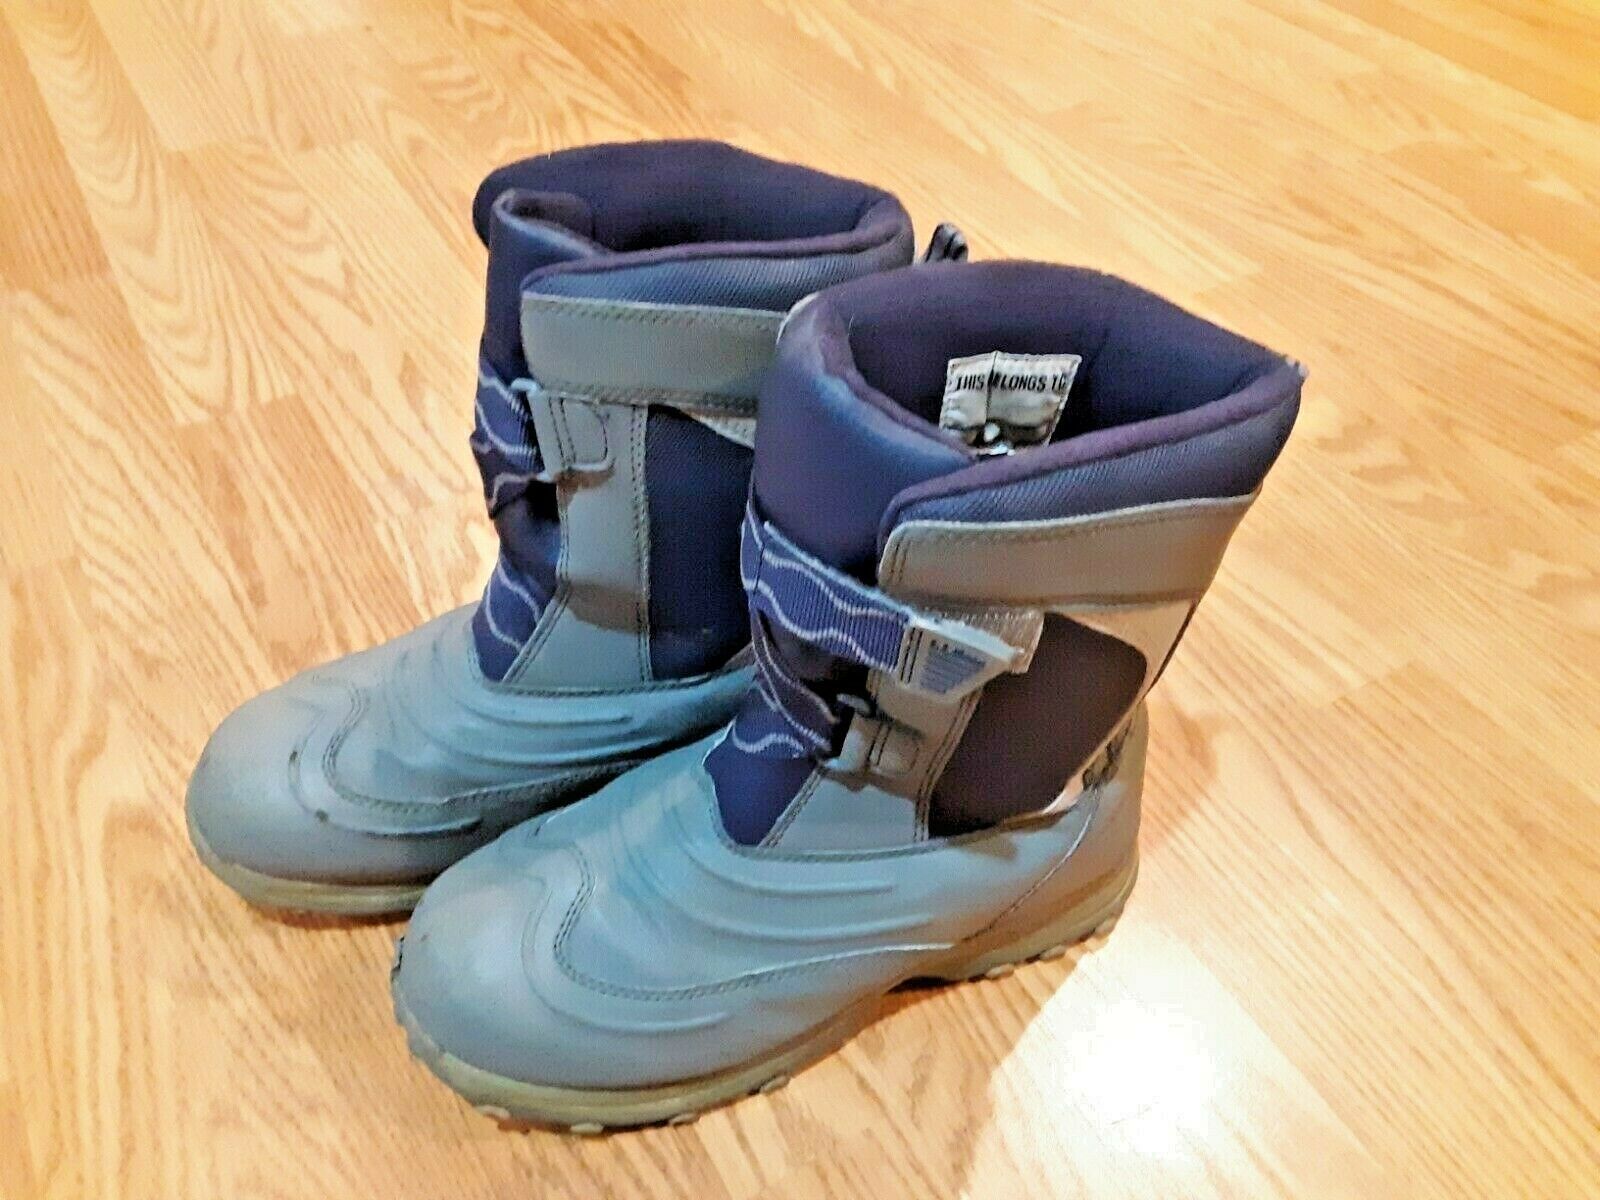 Primary image for LL Bean Kids Size 6 Snow Tread Winter Boots Black Grey